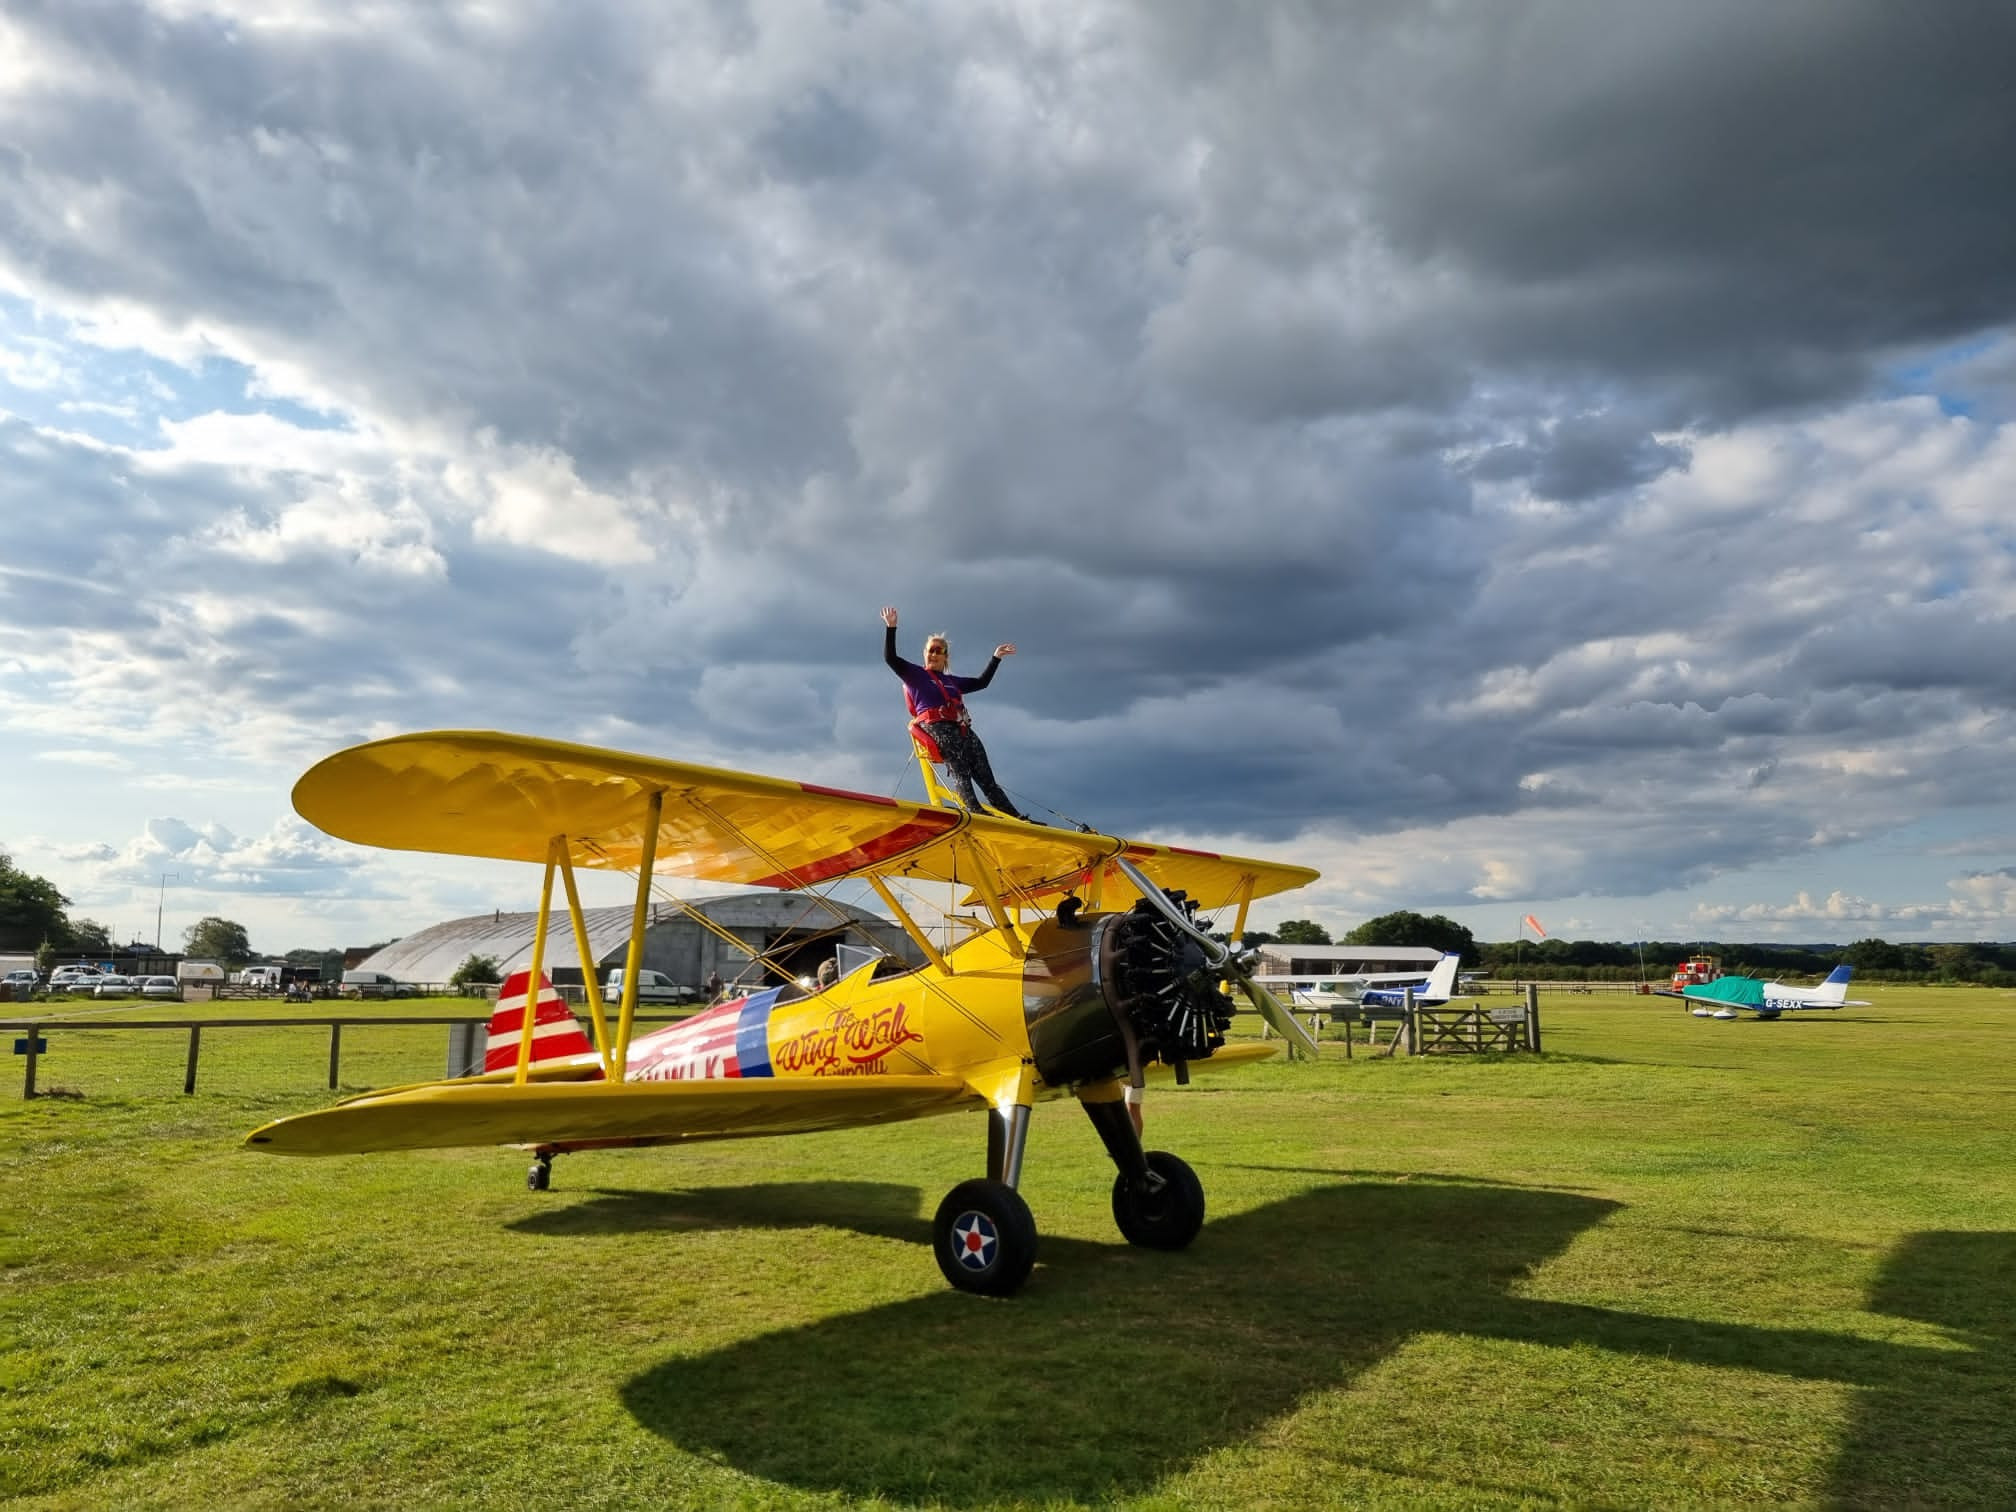 Carly Larkin ready for her flight - she is standing on the top wing of a yellow bi-plane which is parked in a field.